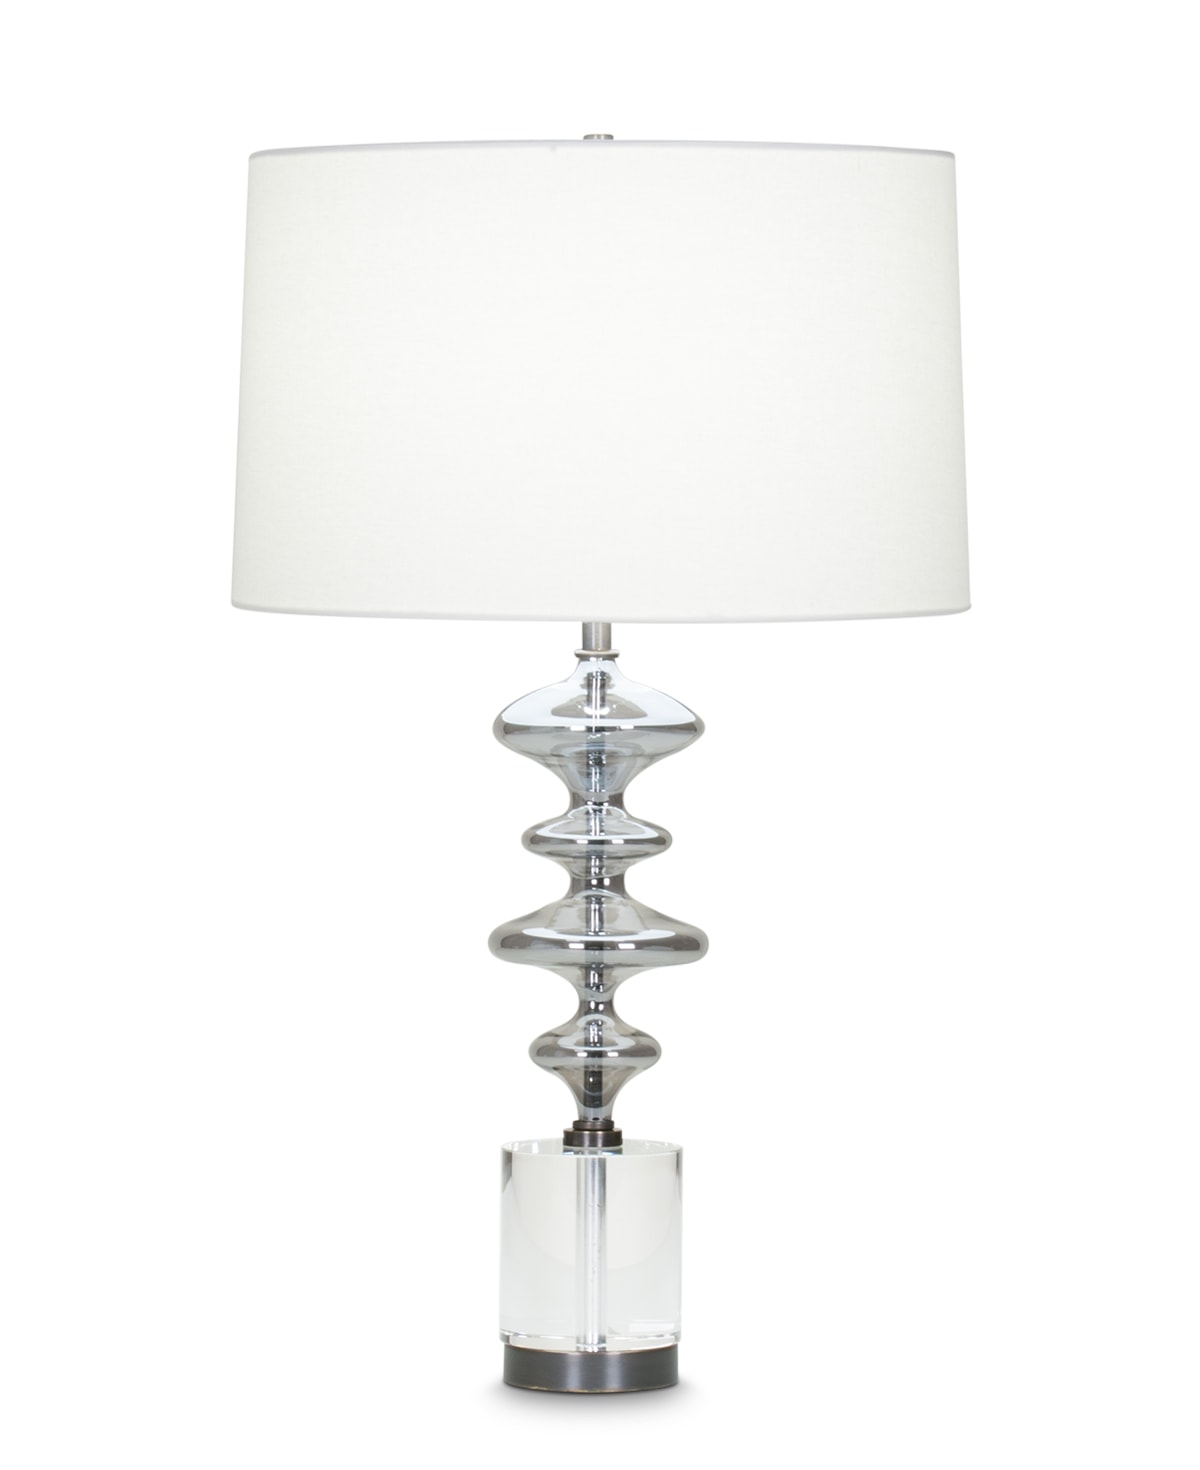 FlowDecor Blume Table Lamp in crystal and glass with smokey grey and metal with bronze finish and off-white cotton tapered drum shade (# 4049)